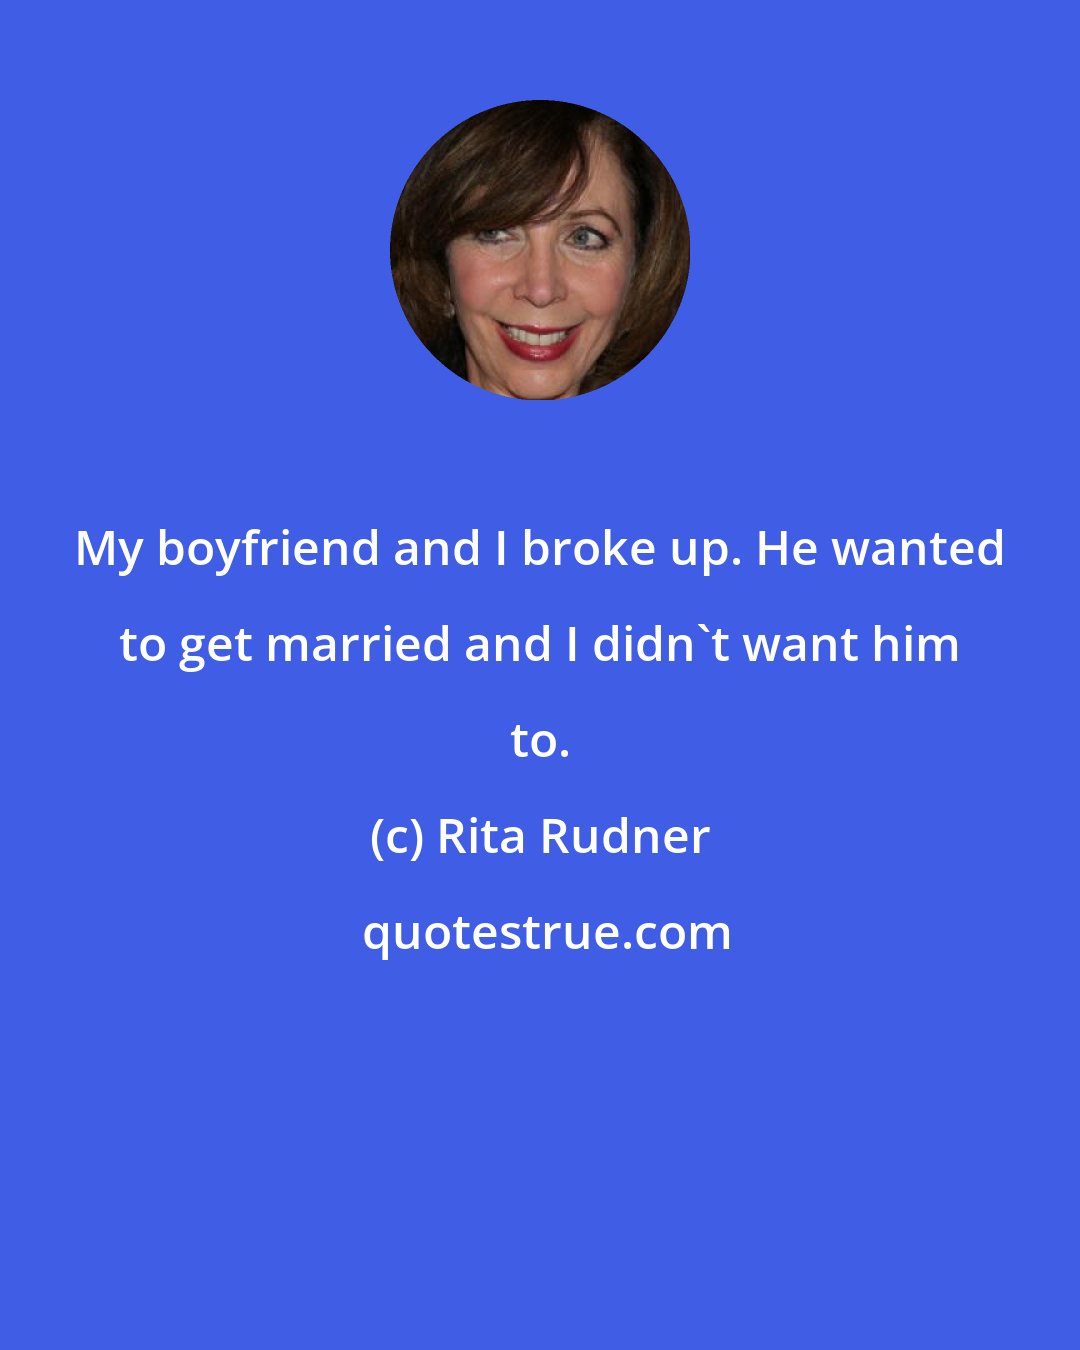 Rita Rudner: My boyfriend and I broke up. He wanted to get married and I didn't want him to.